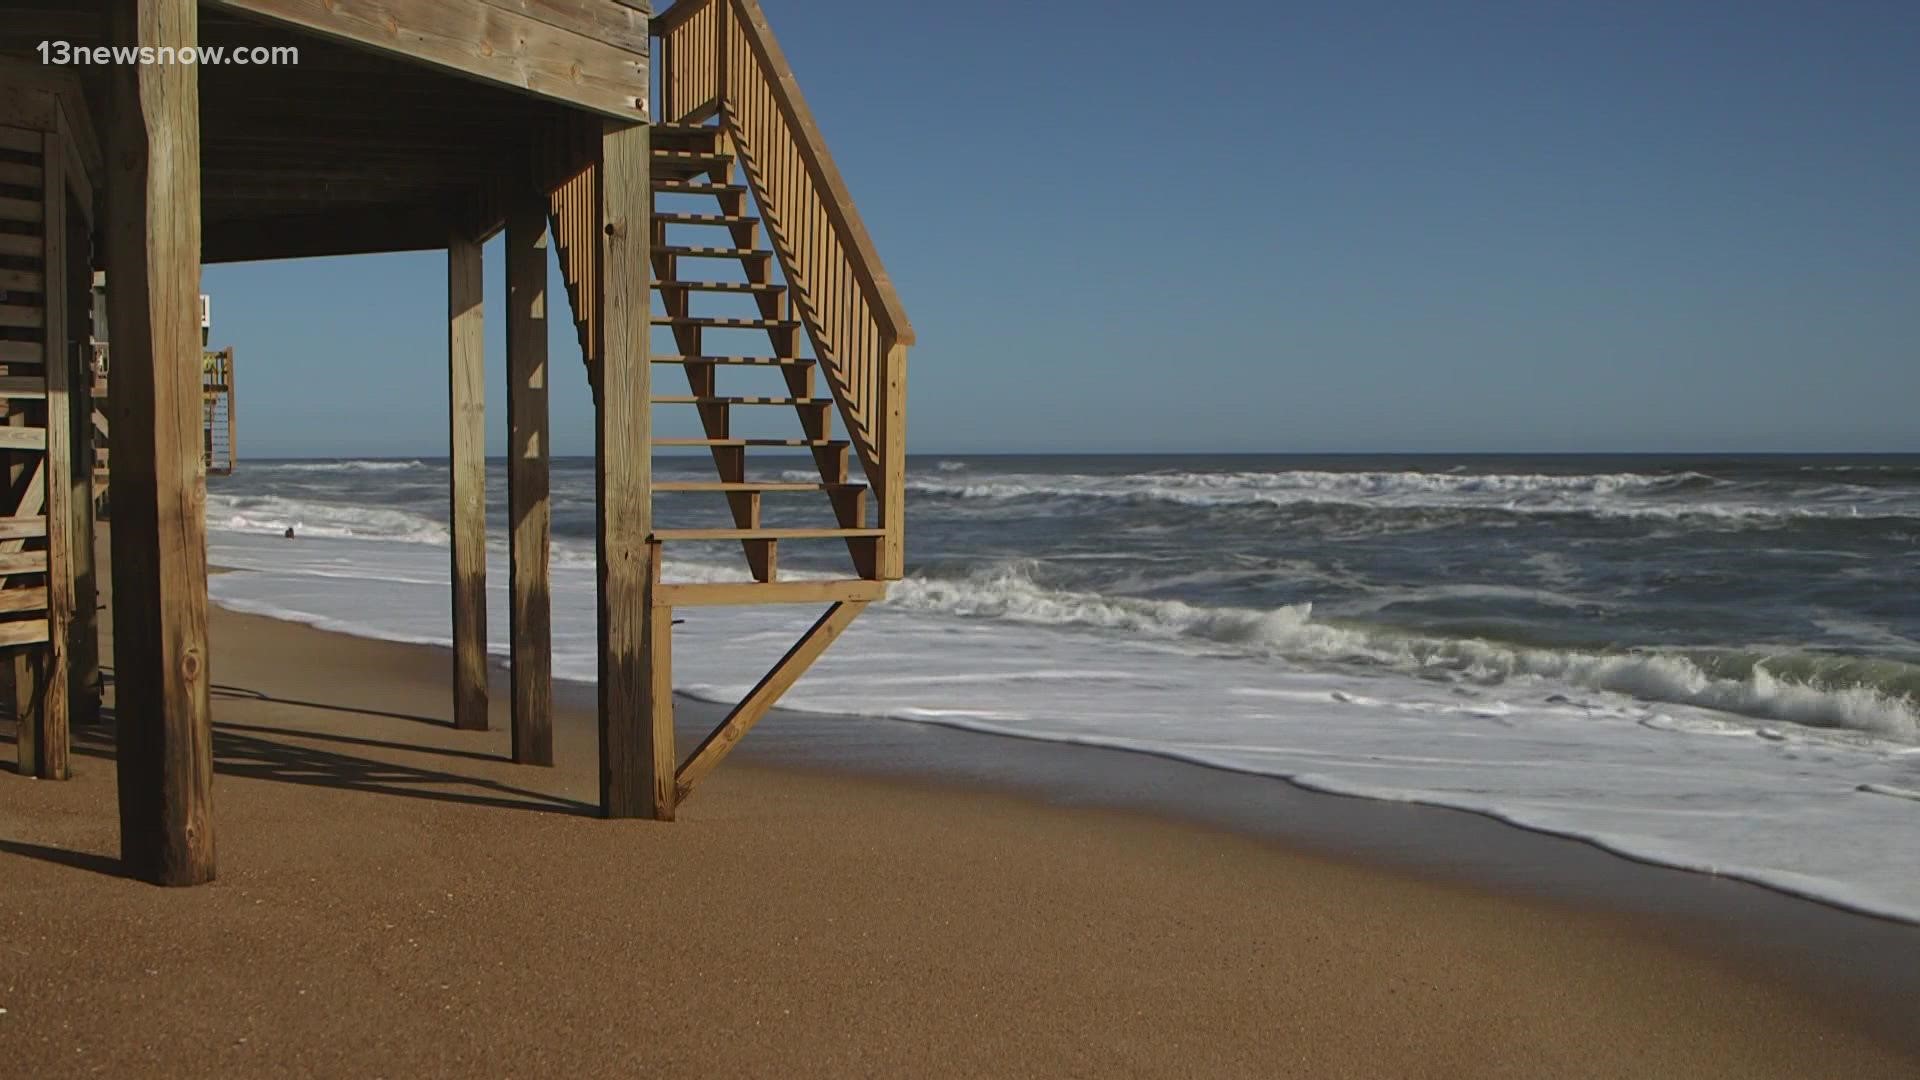 People on the Outer Banks are getting creative to co-exist with rising sea levels. Dare County commissioners recently voted to close a small street in Rodanthe.